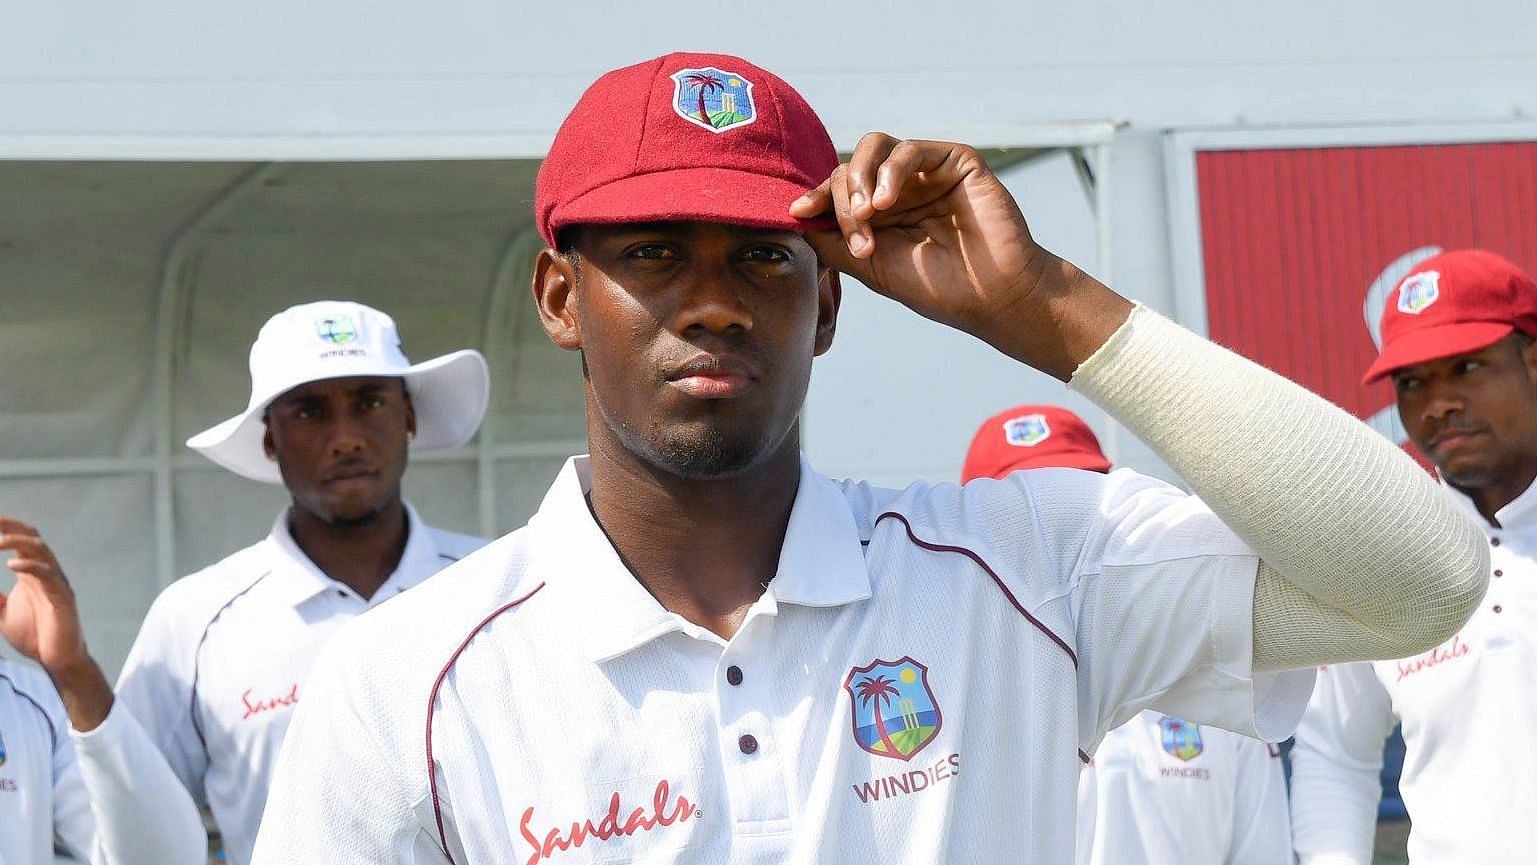 All-rounder Kemmo Paul has been ruled out of the first Test against India due to an ankle injury.